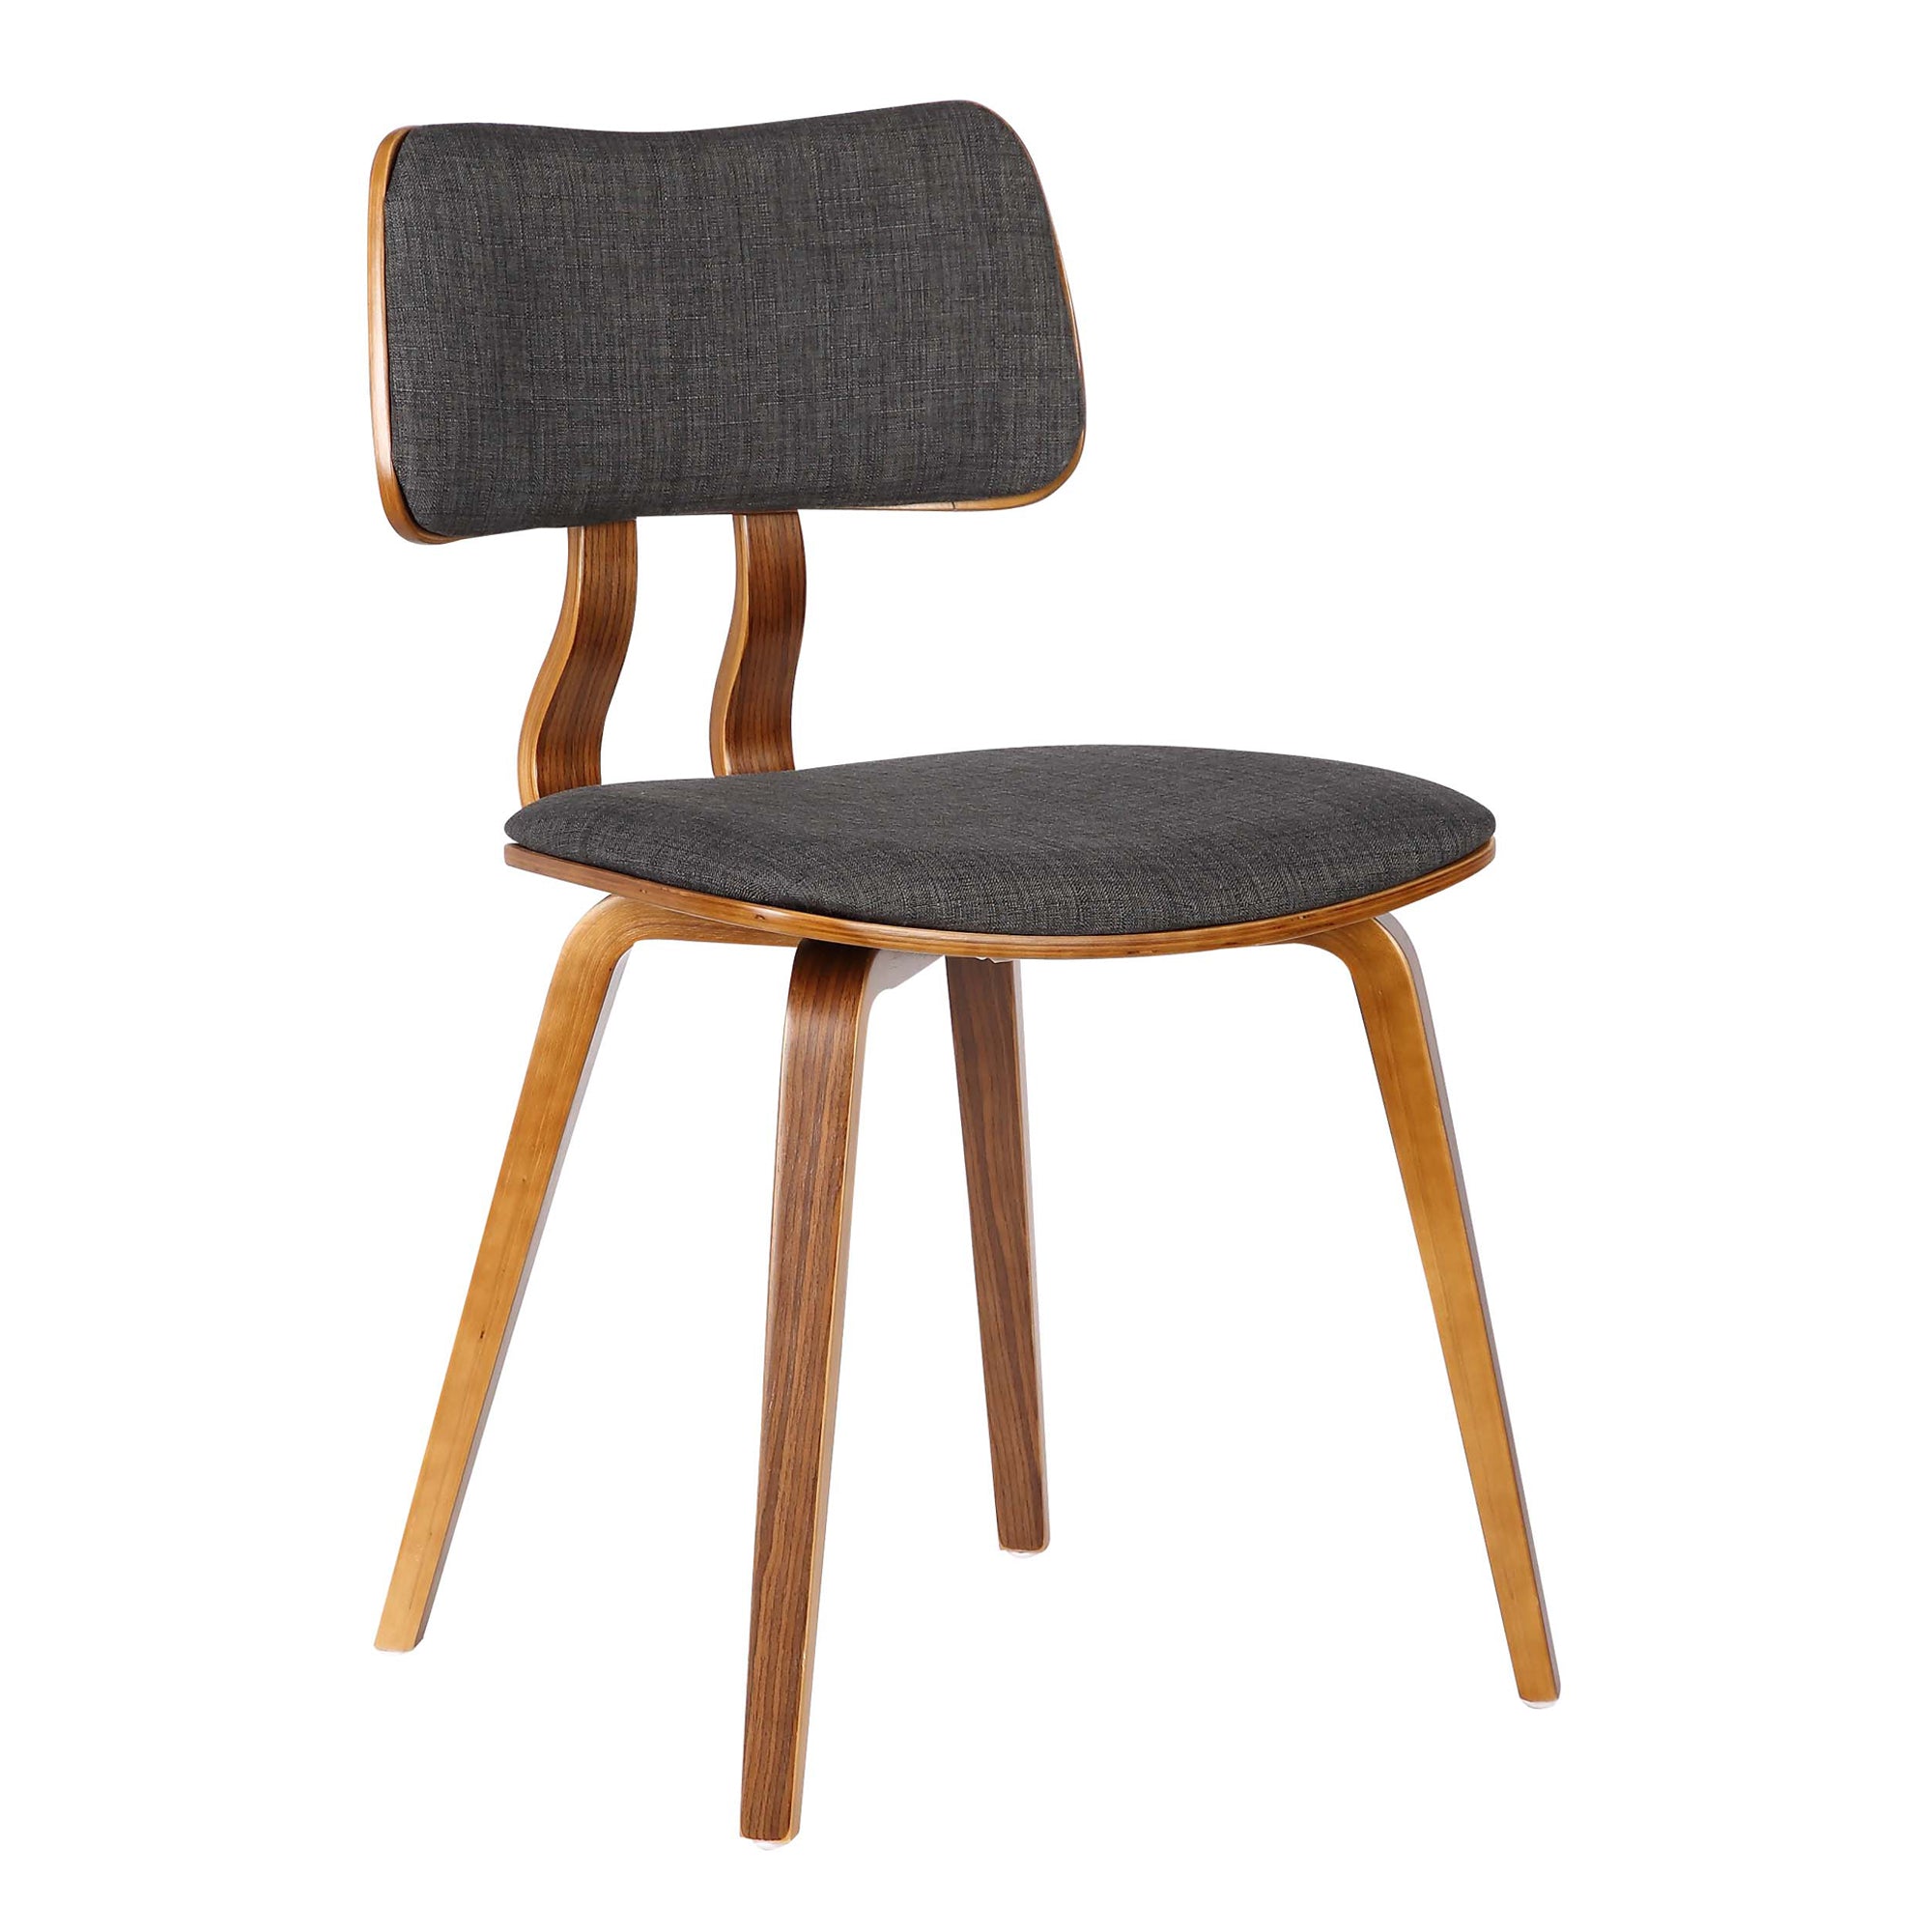 Armen Living Lcjasiwach Jaguar Mid-century Dining Chair In Walnut Wood And Charcoal Fabric